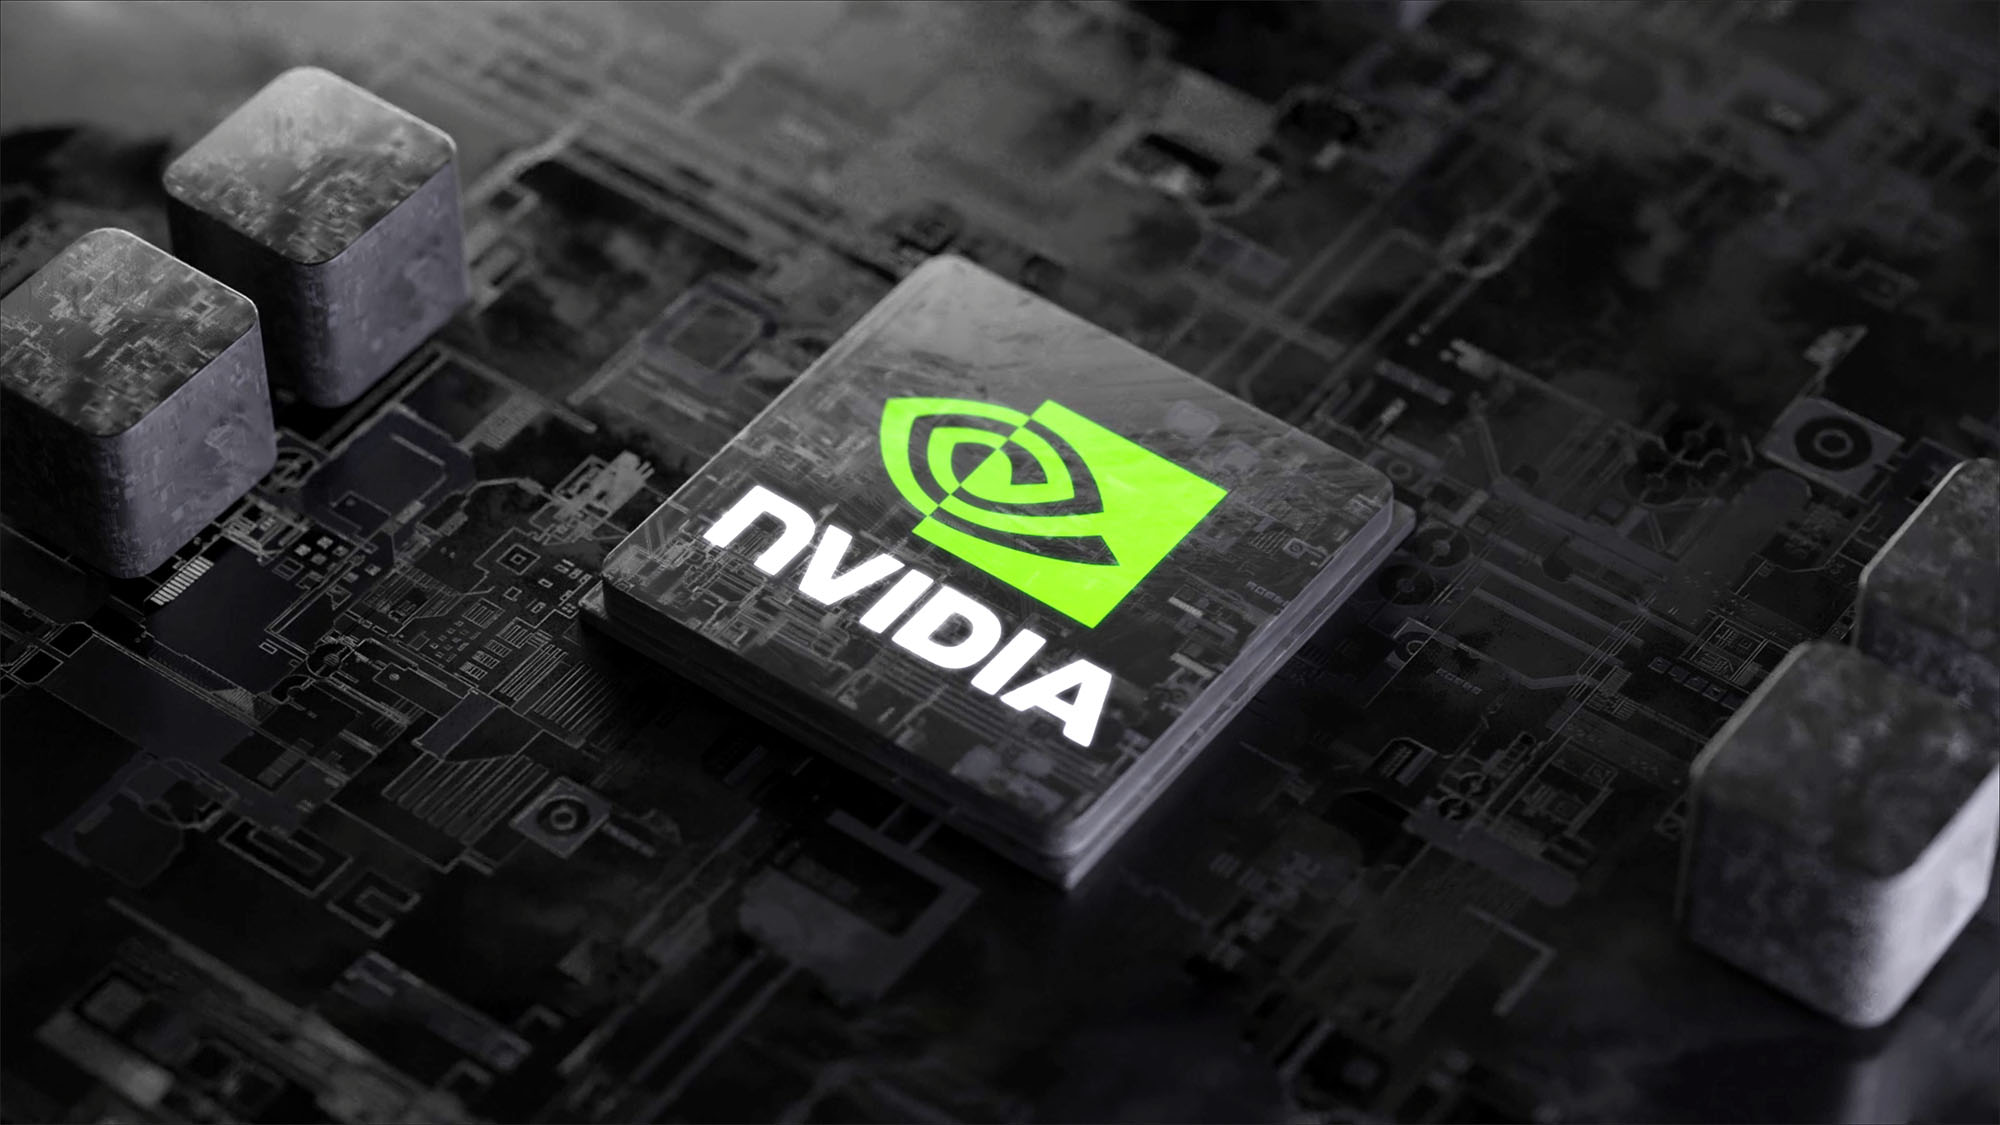 17-facts-about-nvidia